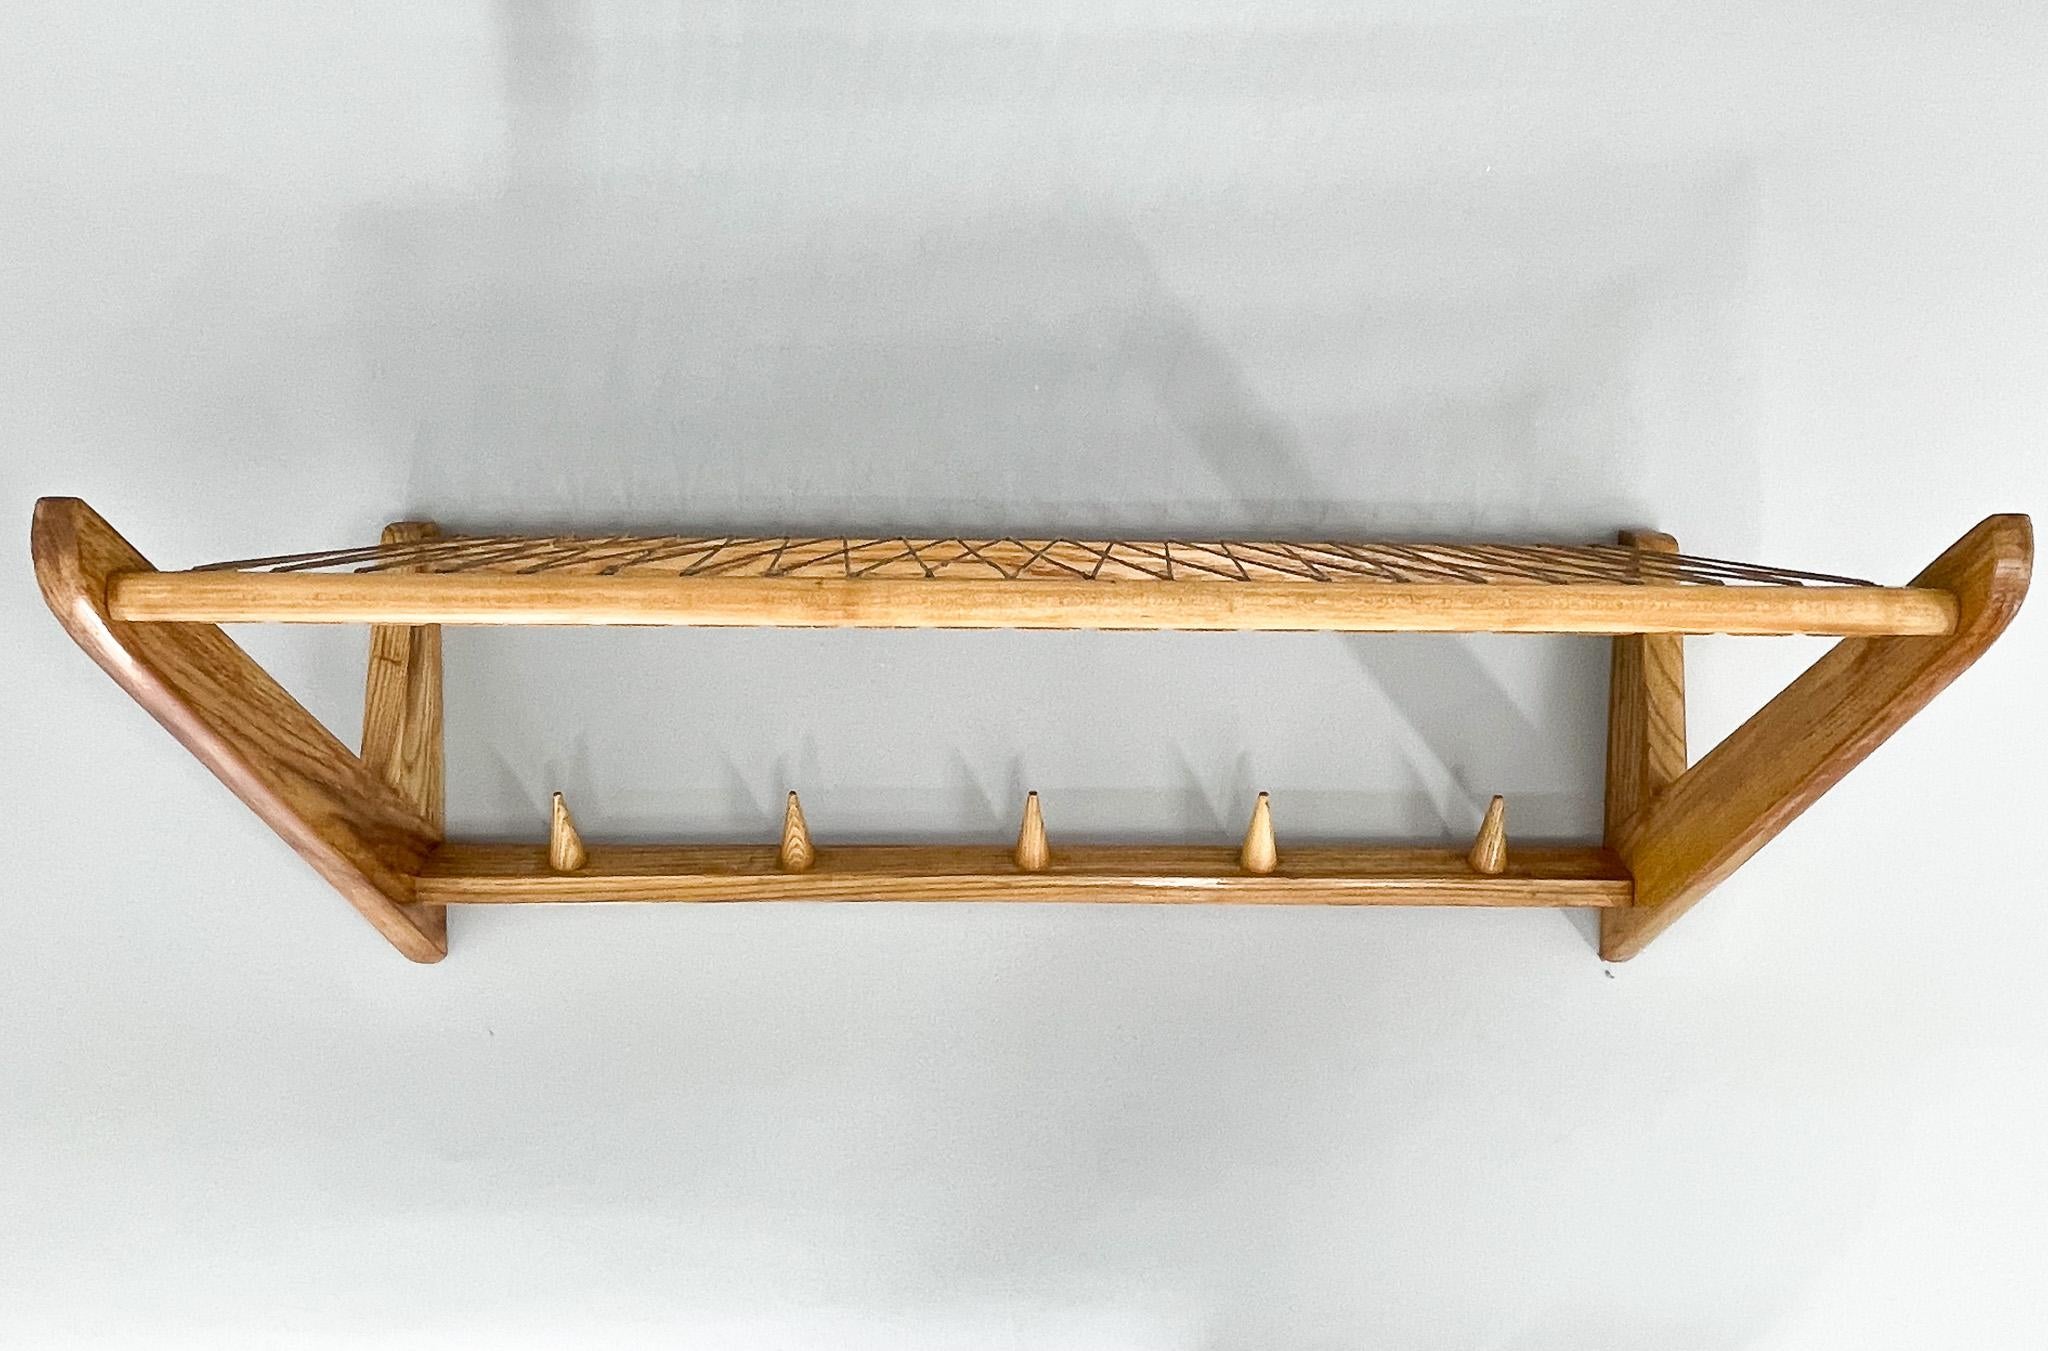 Vintage wooden wall hanger with a shelf made of strings intertwined with wood. Original design from the 1960s by ULUV.